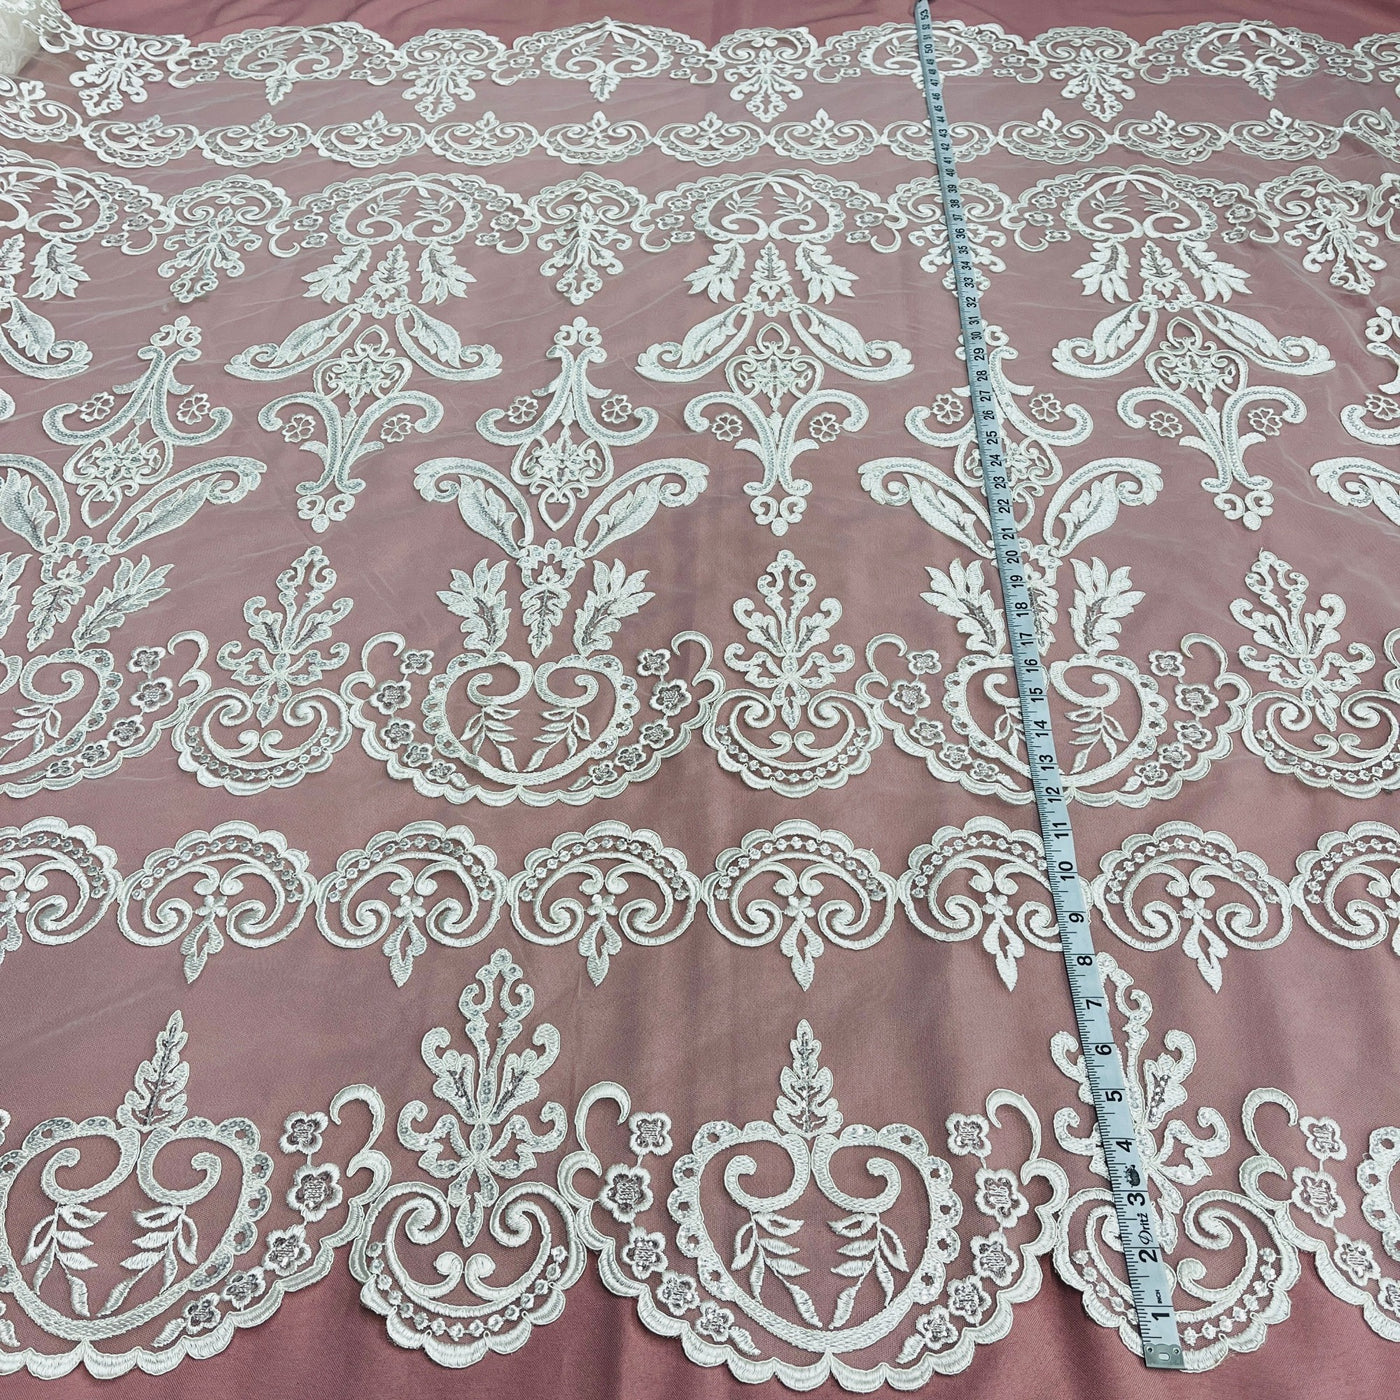 Beaded & Corded Bridal Lace Fabric Embroidered on 100% Polyester Net Mesh | Lace USA - 97068W-SB Ivory